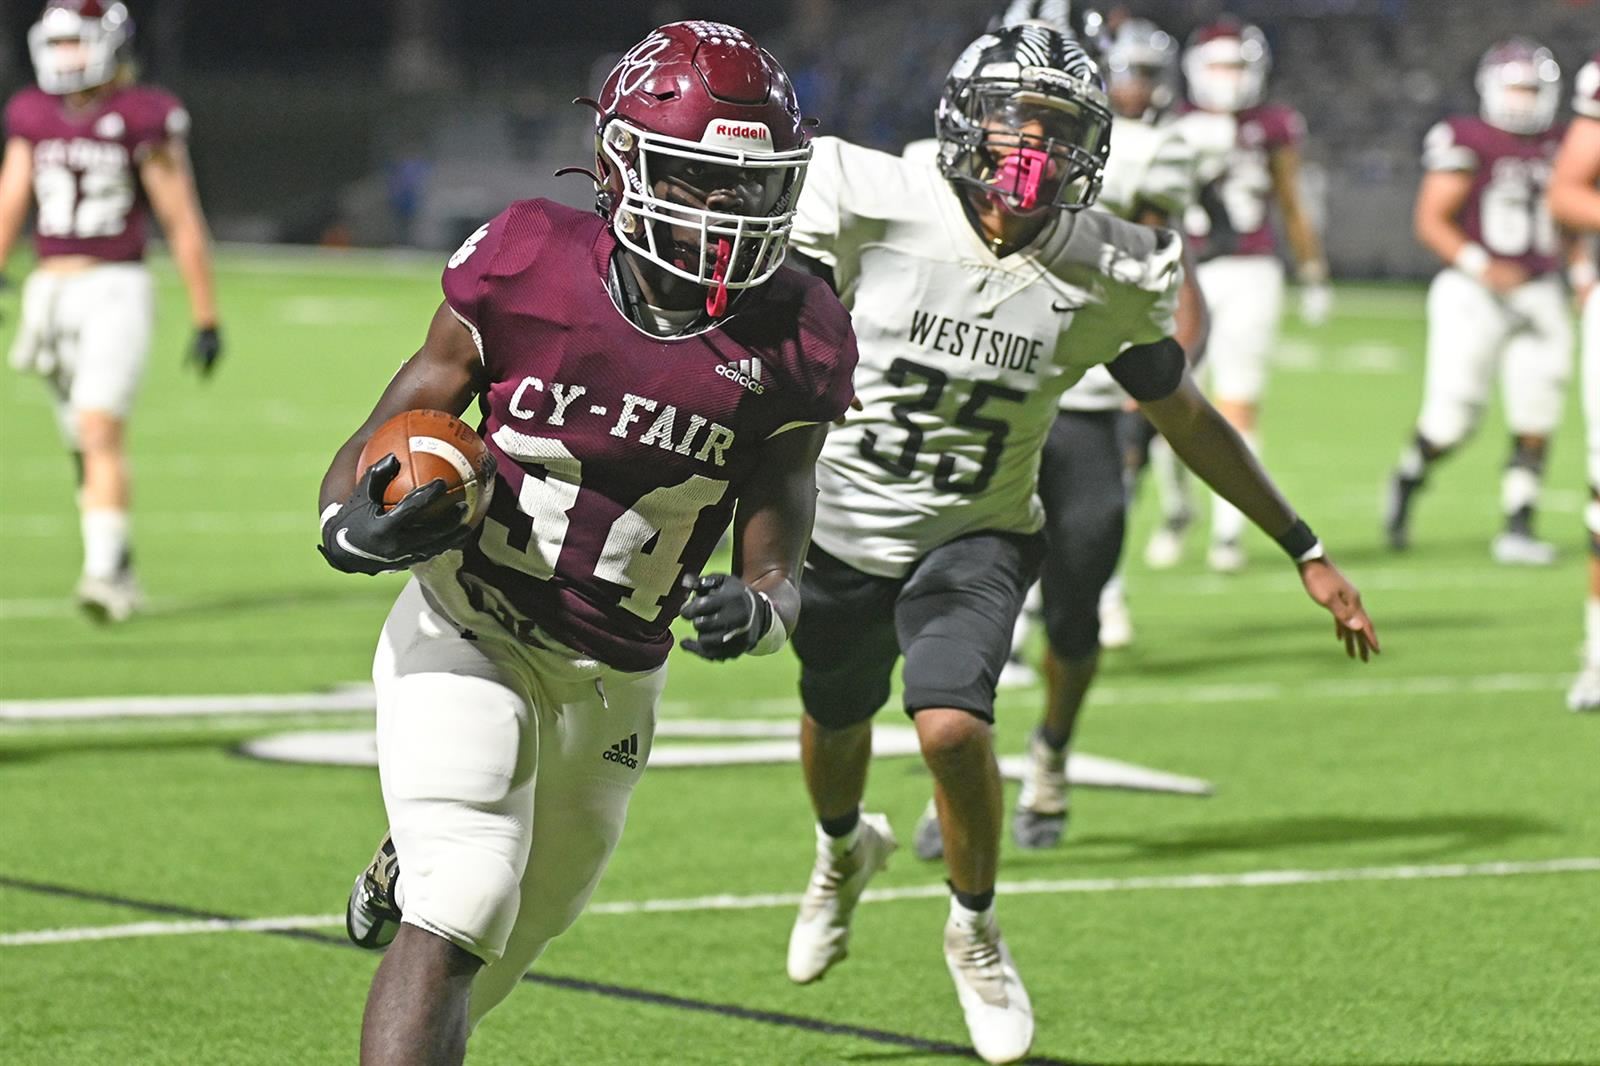 Football playoffs continue for Cy-Fair, Cypress Falls in area round.